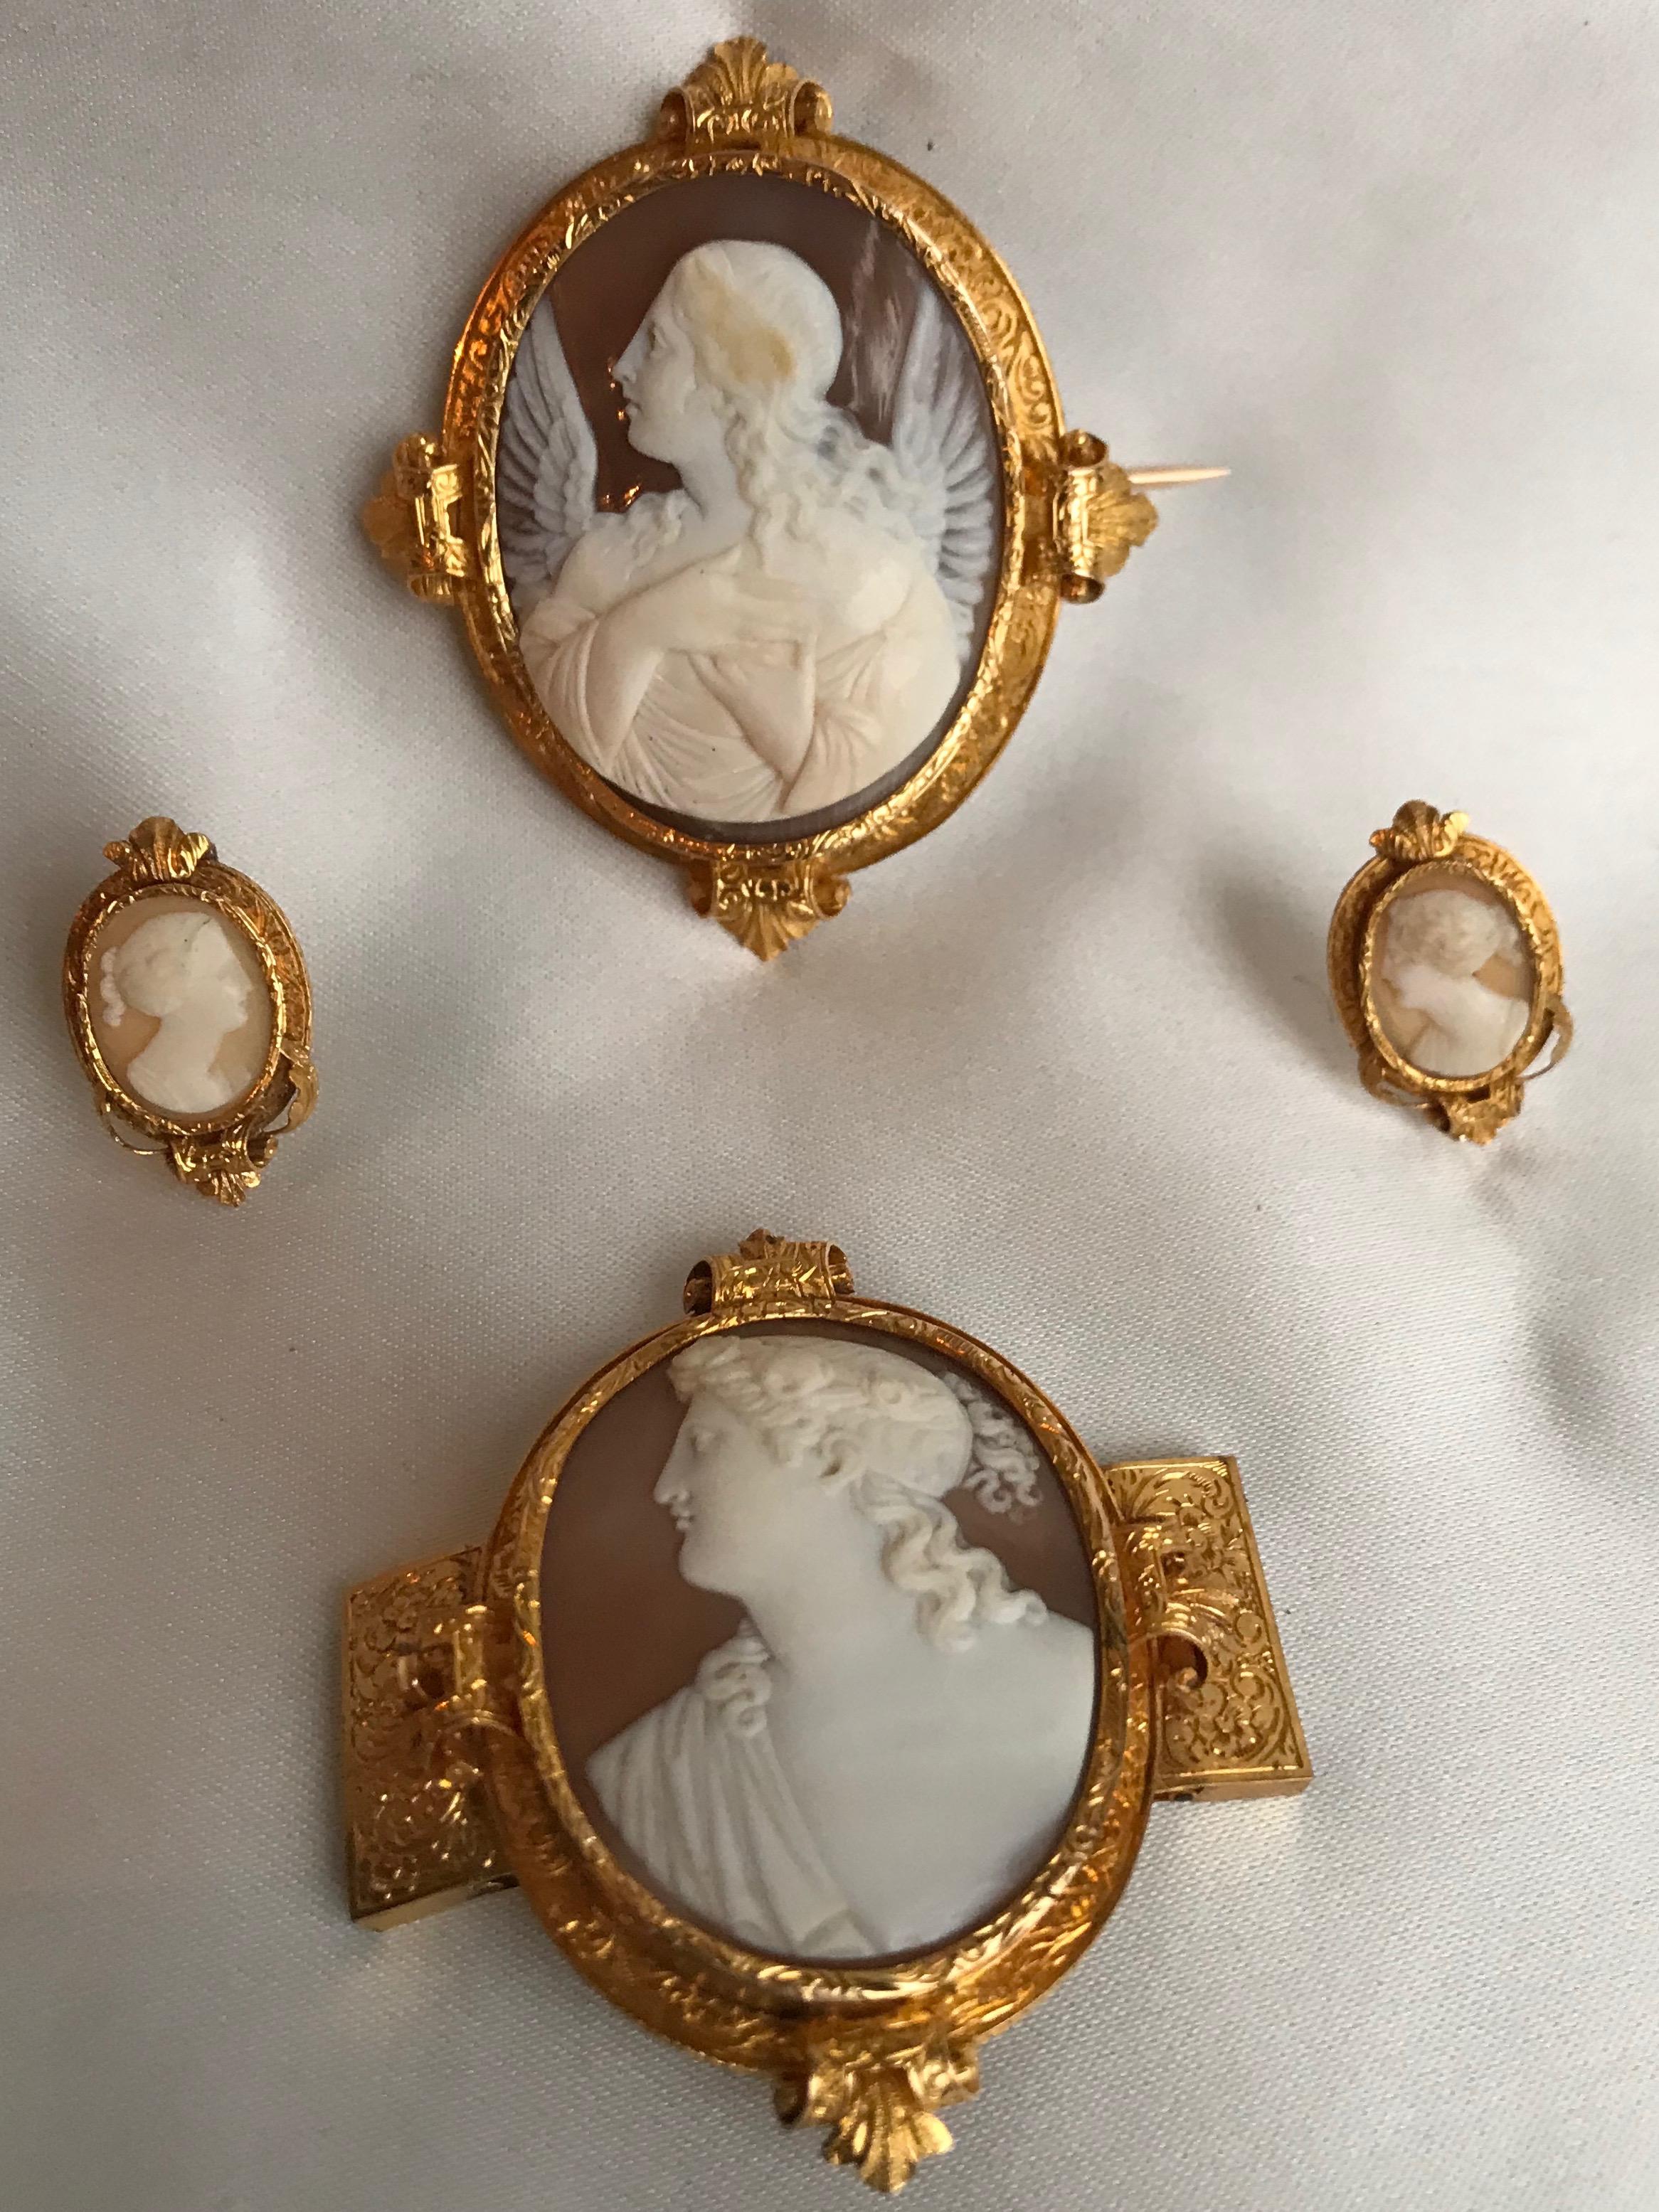  Froment-Meurice Set in 18 Carat, Yellow Gold and Cameo, 19th Century 2